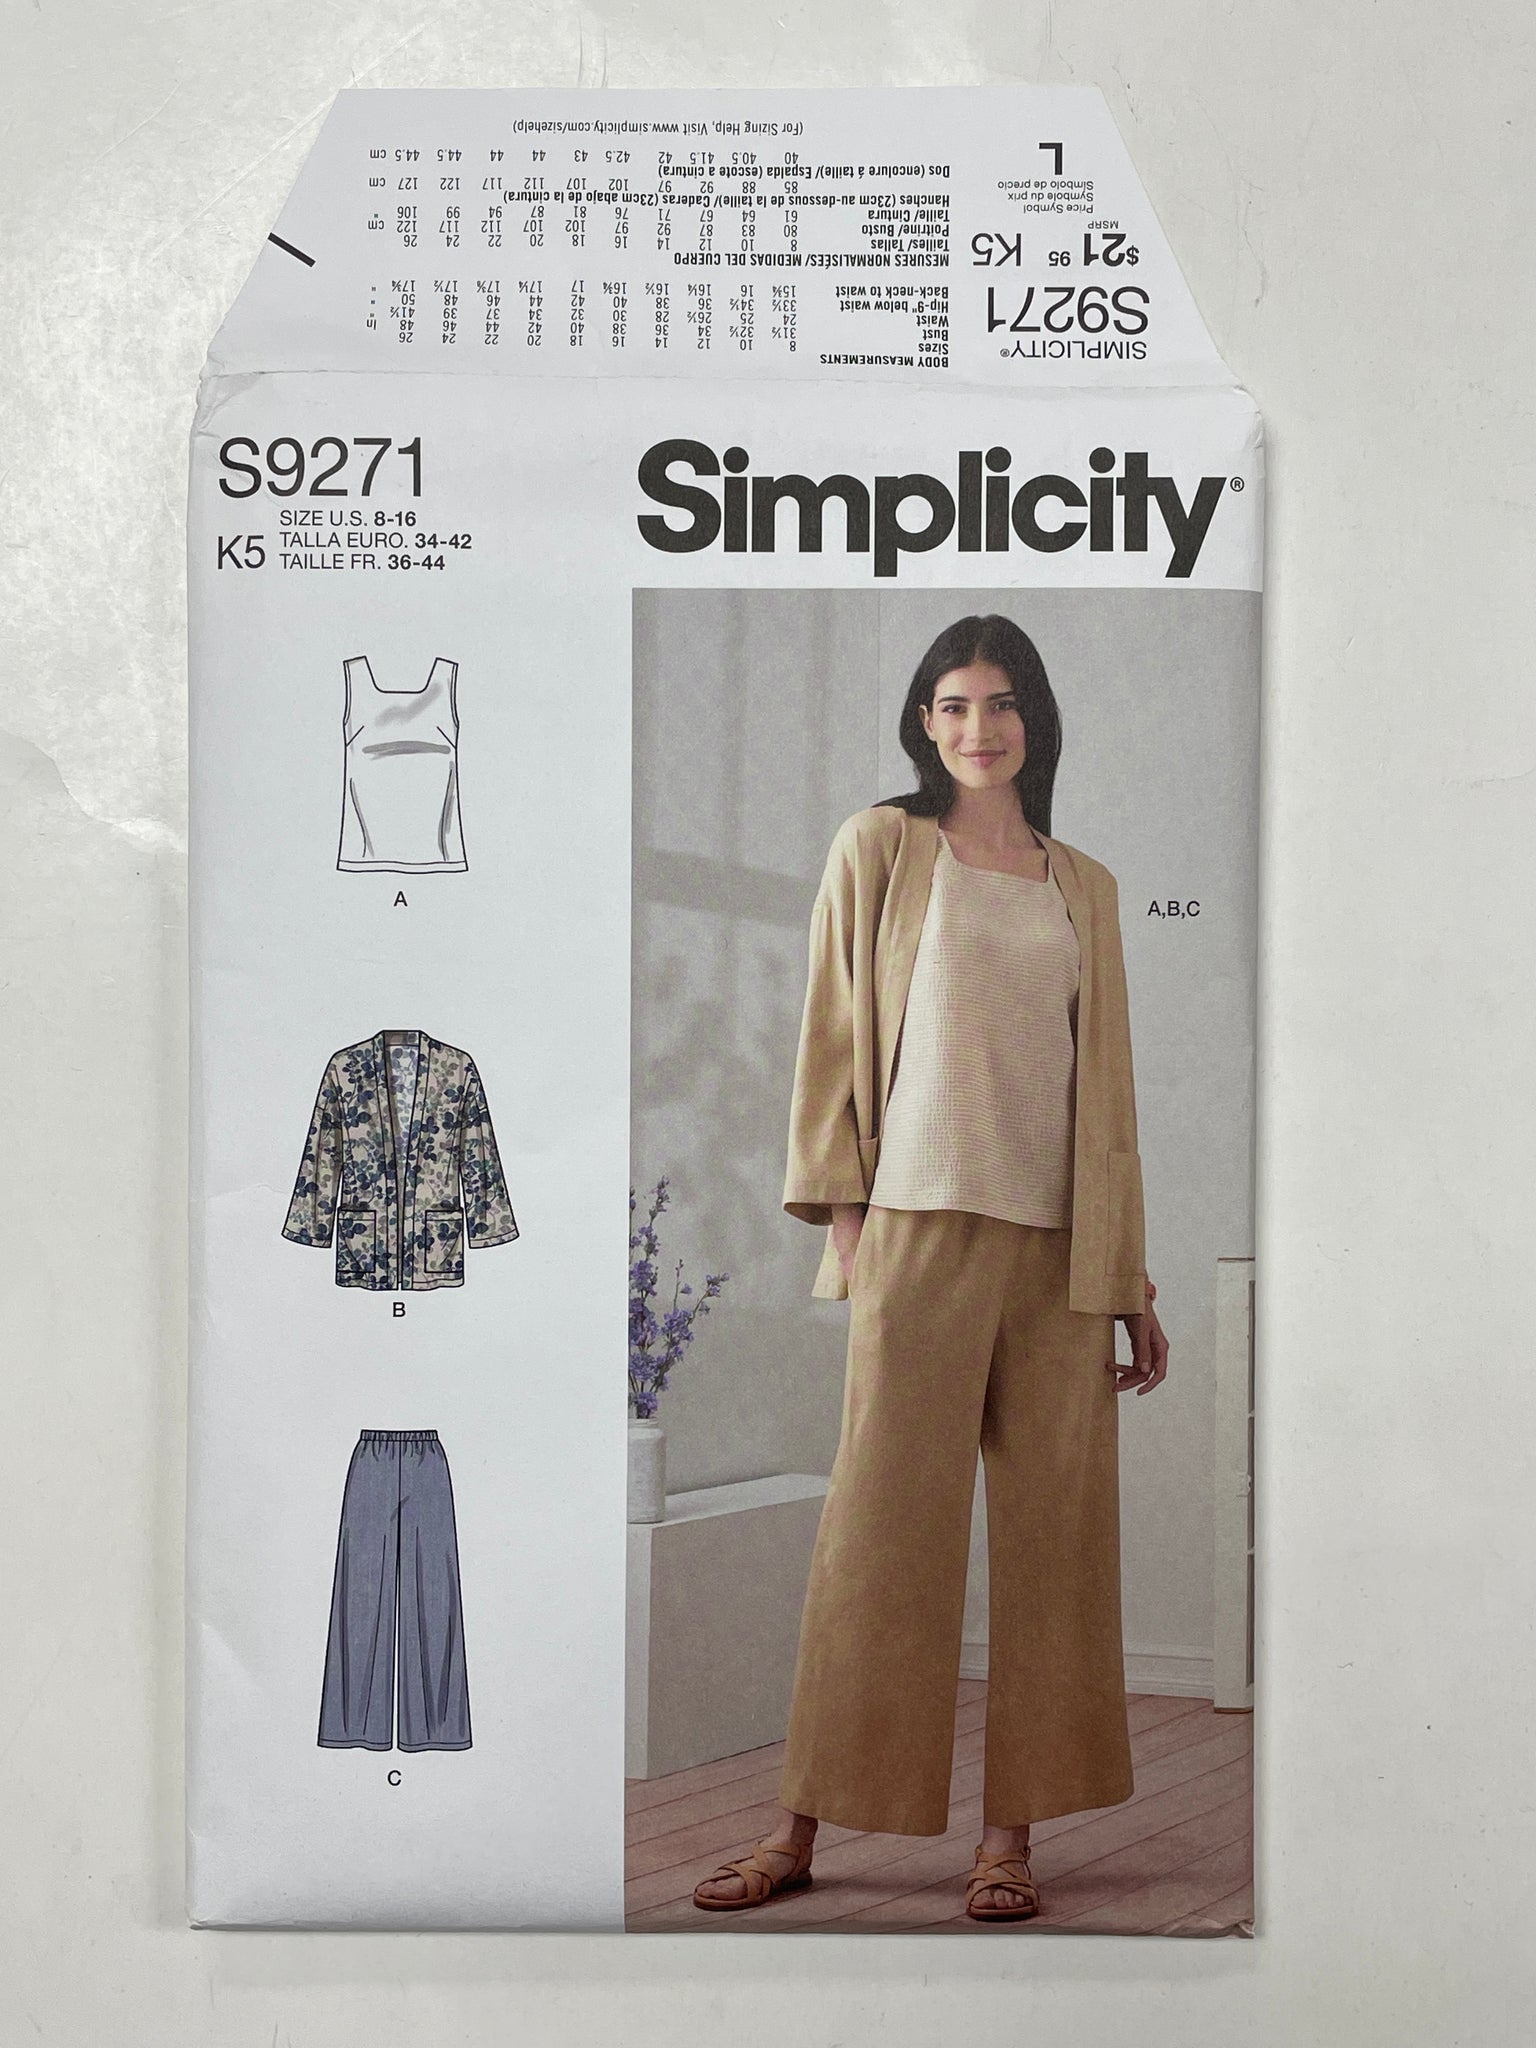 2021 Simplicity 9271 Sewing Pattern - Top, Jacket and Pants FACTORY FOLDED